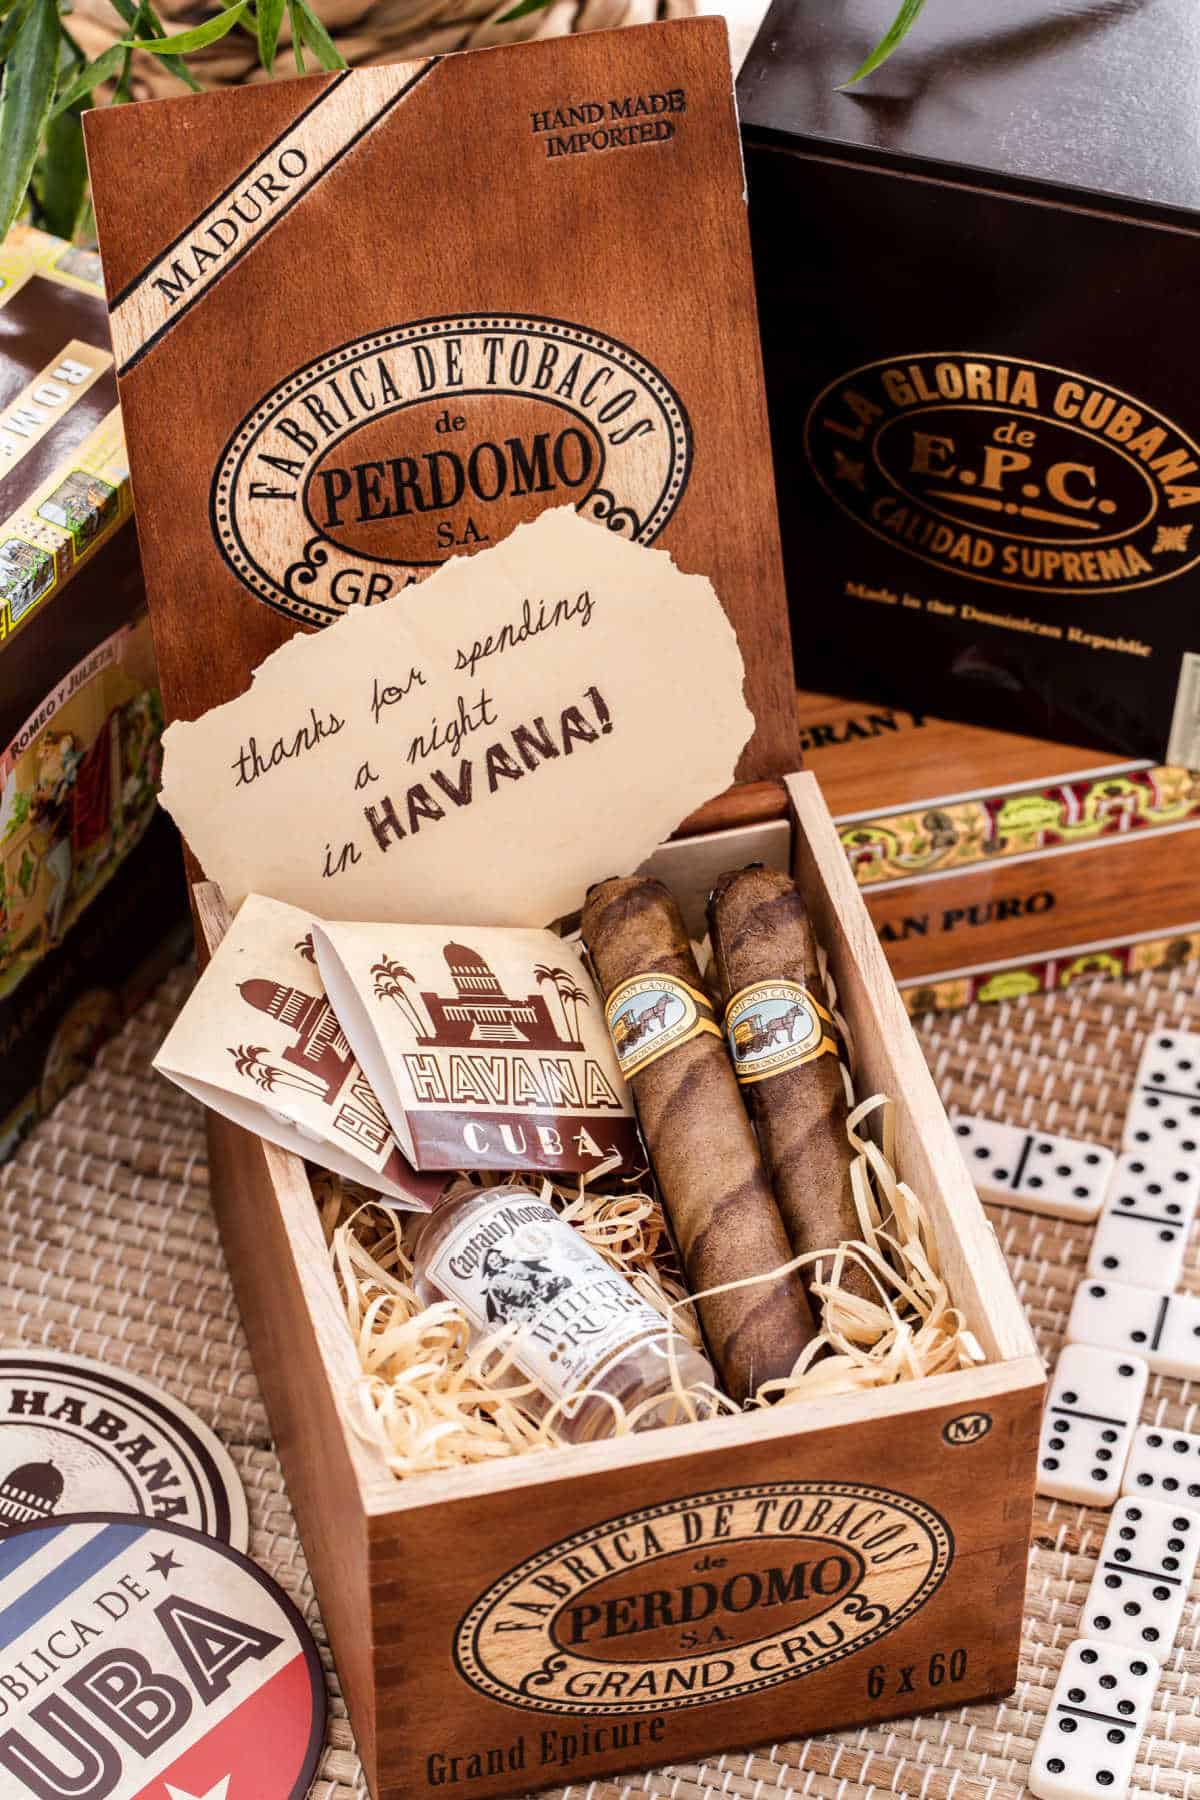 cigar box filled with candy cigars, matches, and mini rum bottle.